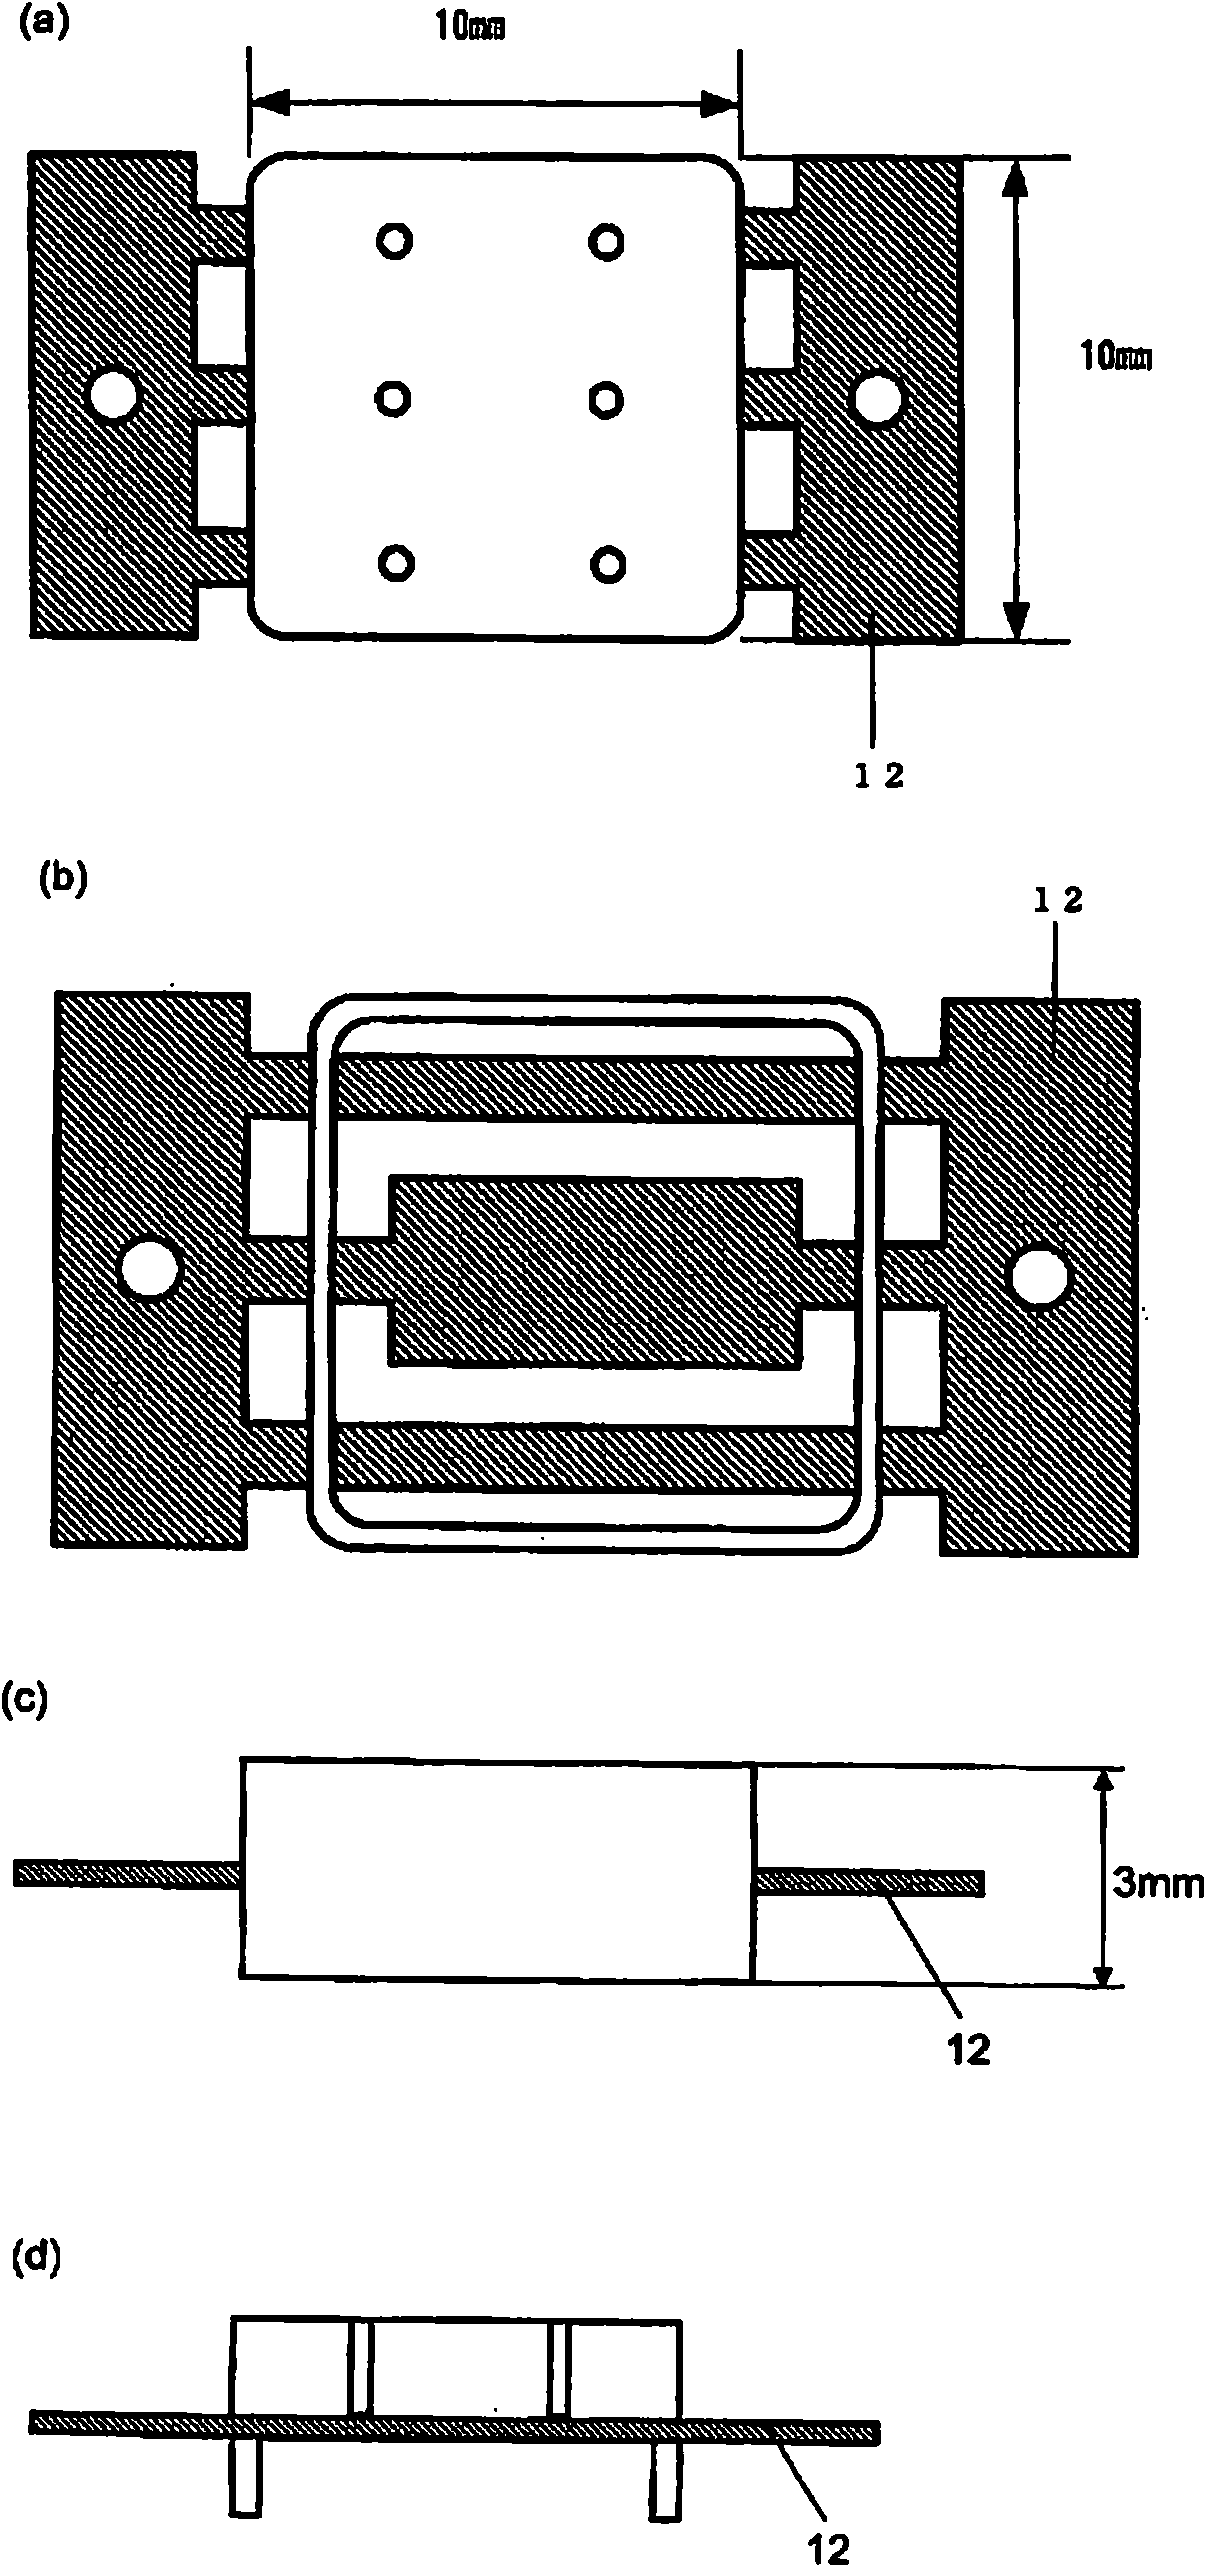 Process for producing composite molding